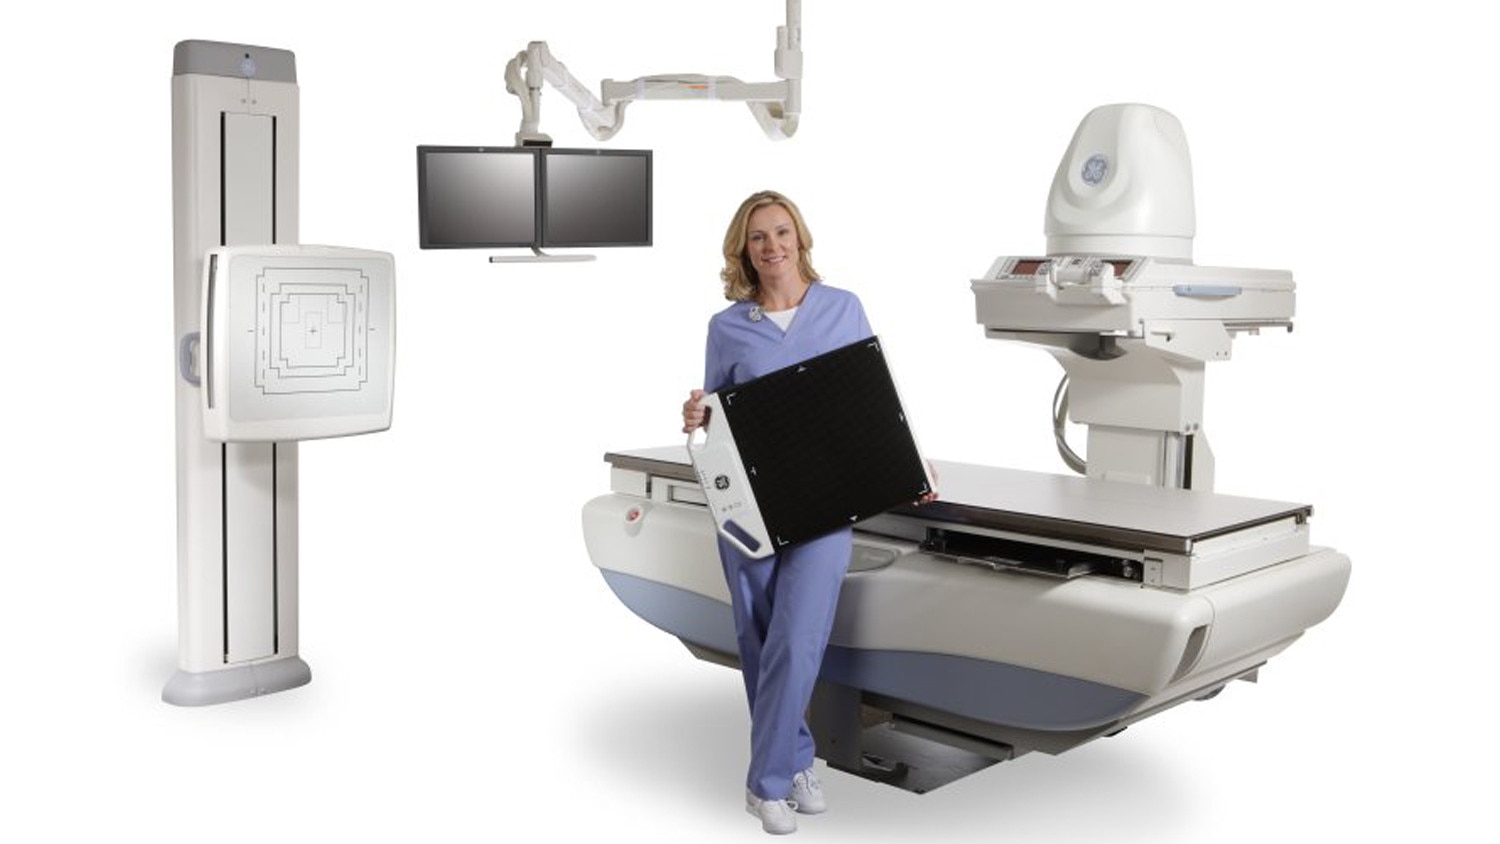 education-product-education-clinical-tip-applications-x-ray-precision-500d-system_jpg